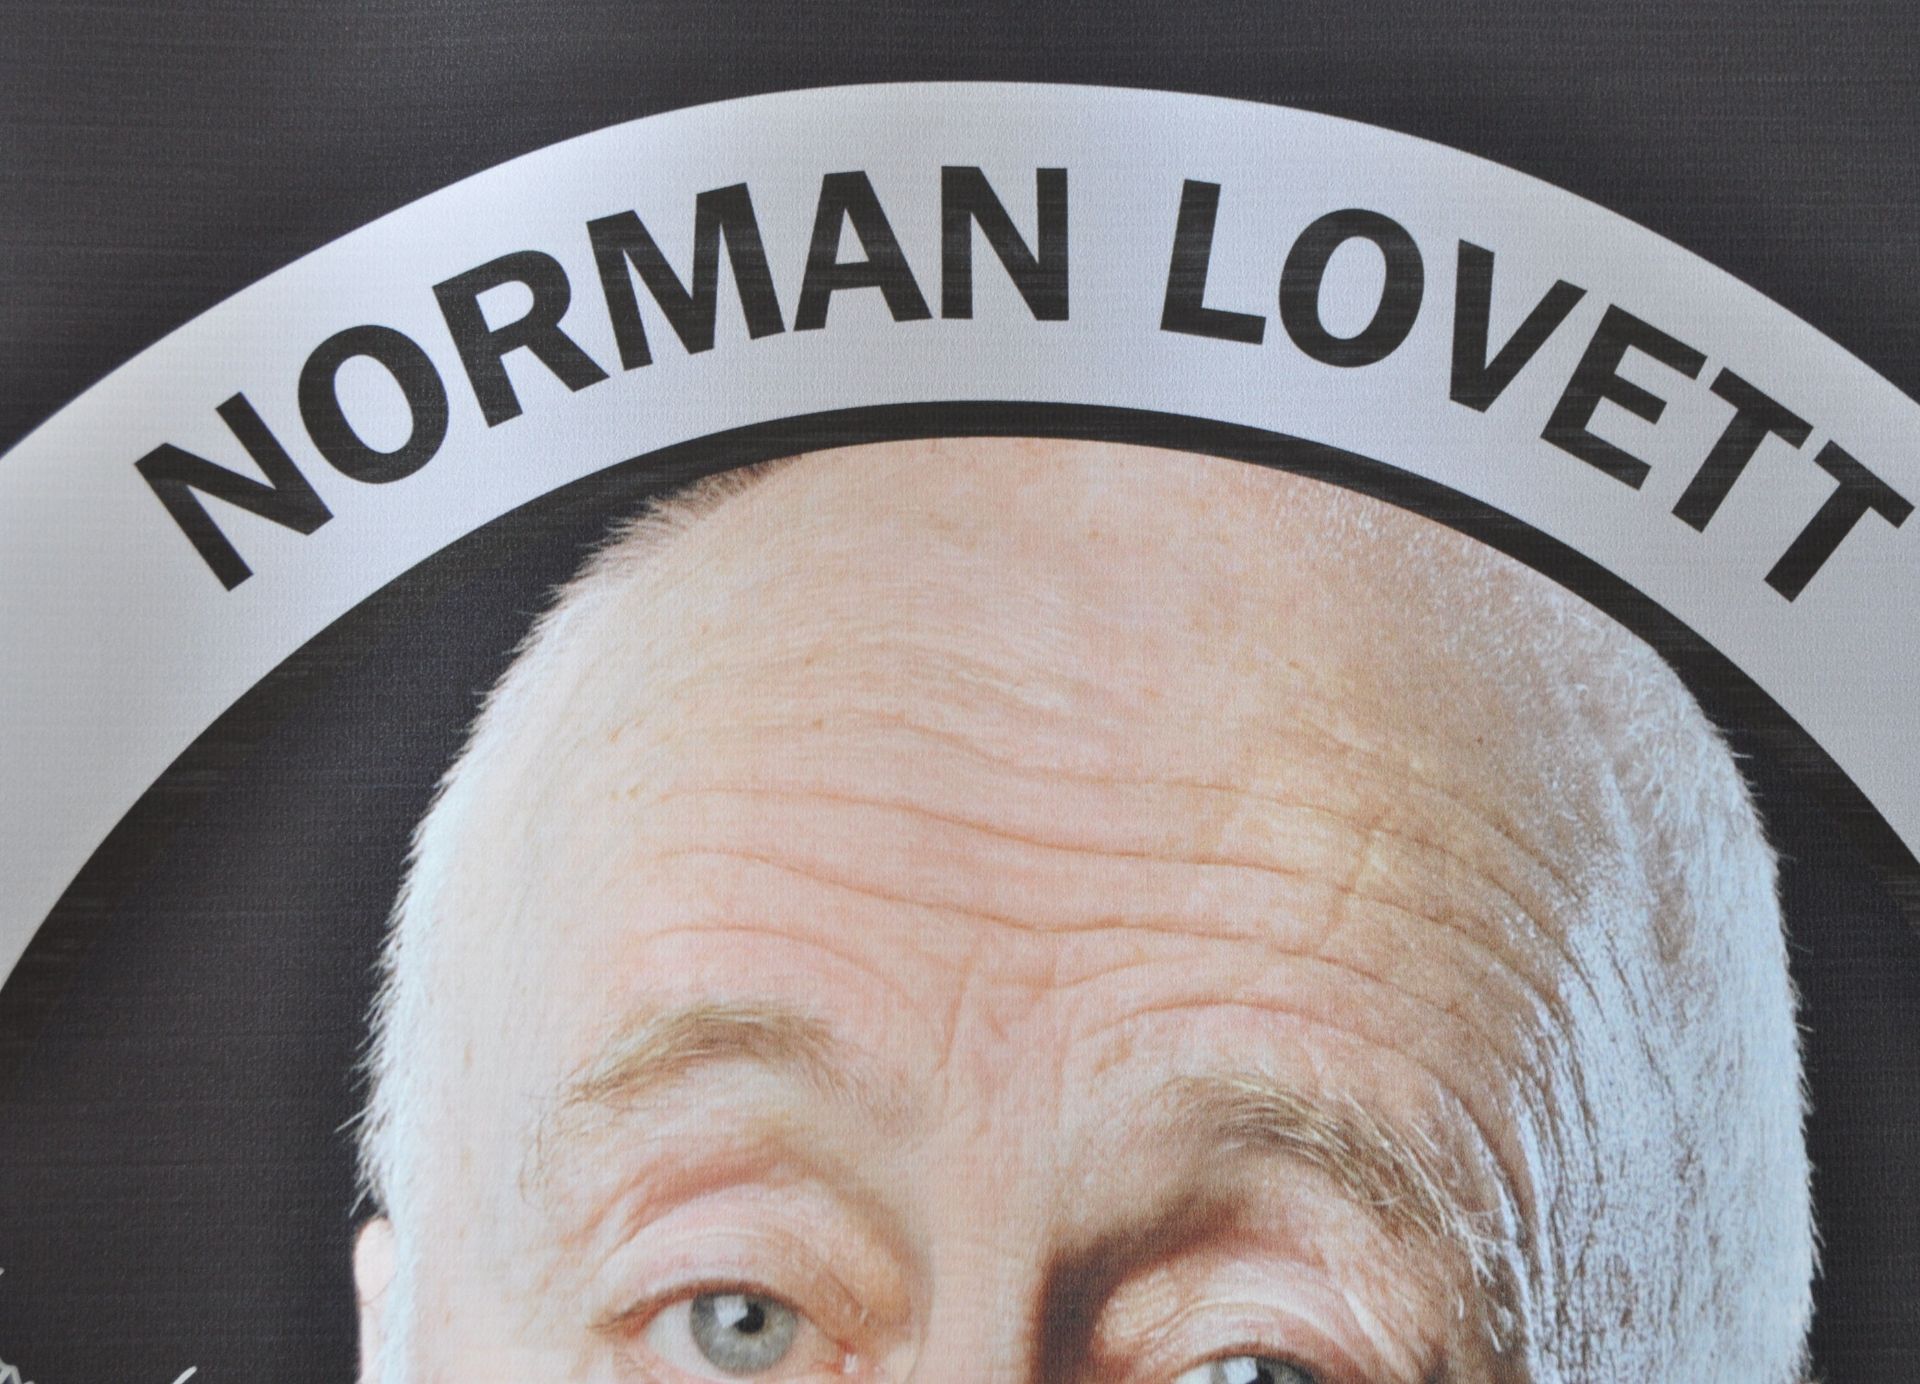 MONOPOLY EVENTS - AUTOGRAPHED BANNER - NORMAN LOVETT - Image 2 of 3